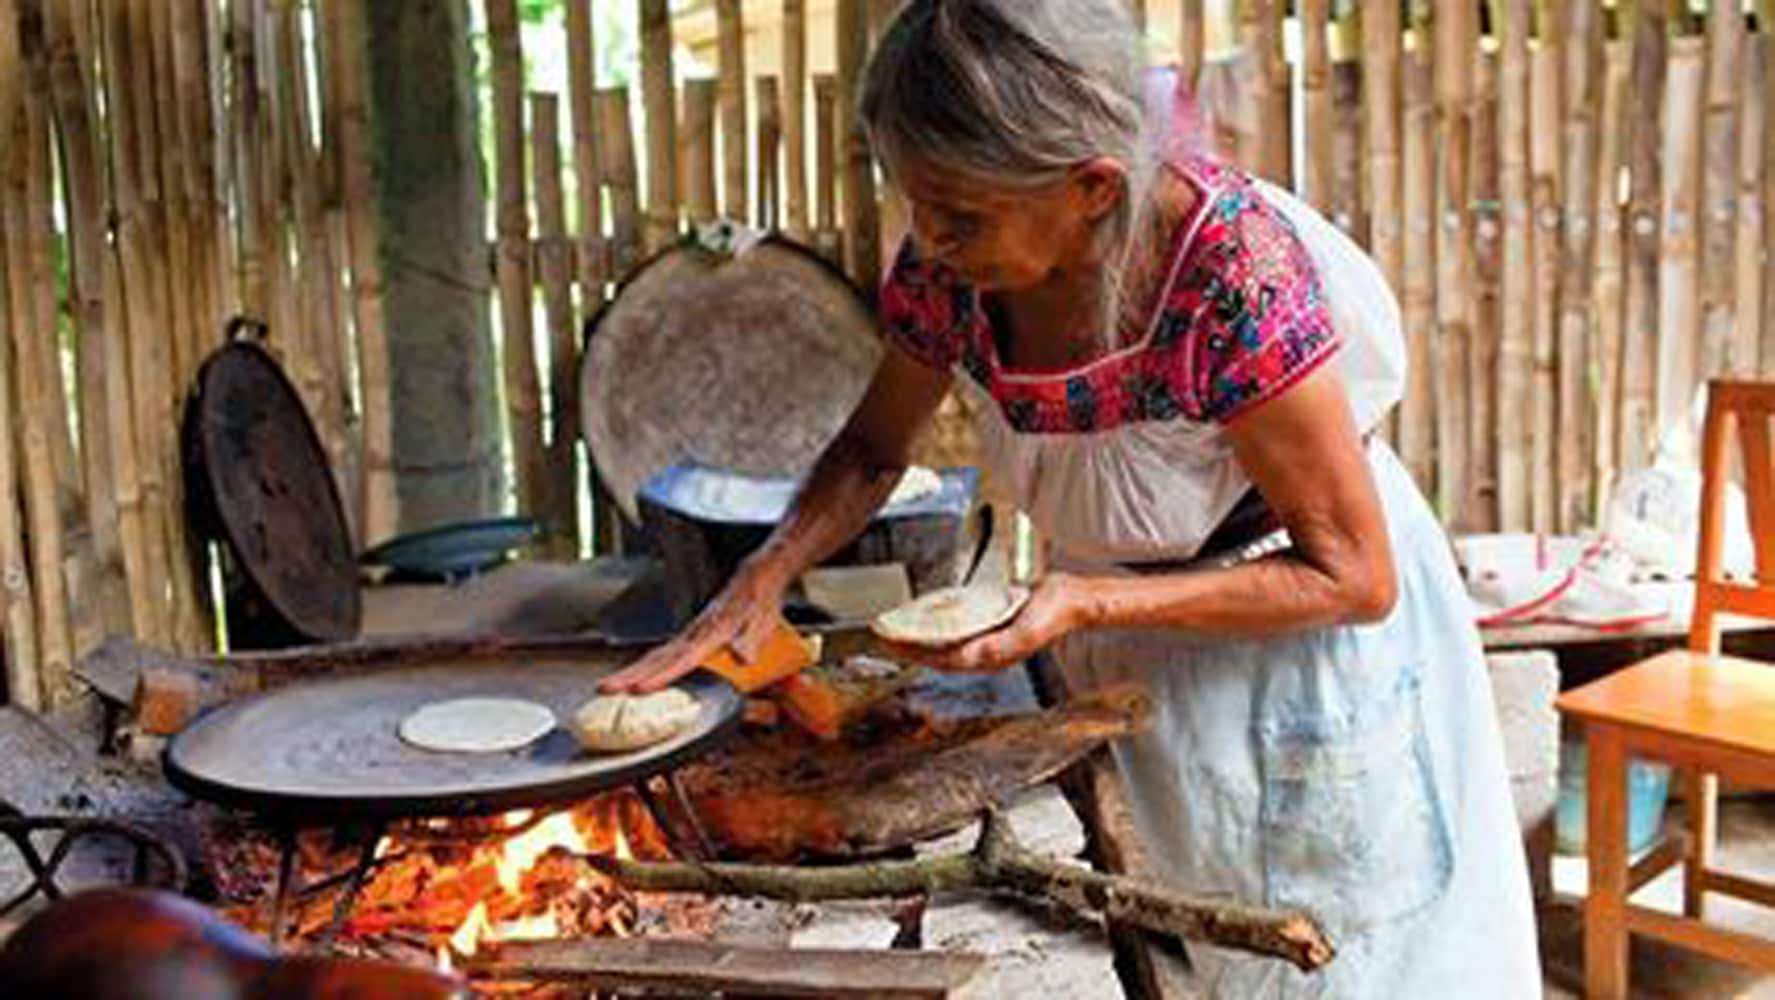 What's it like to live in Chelem? Retiring to Mexico & living in the Yucatan